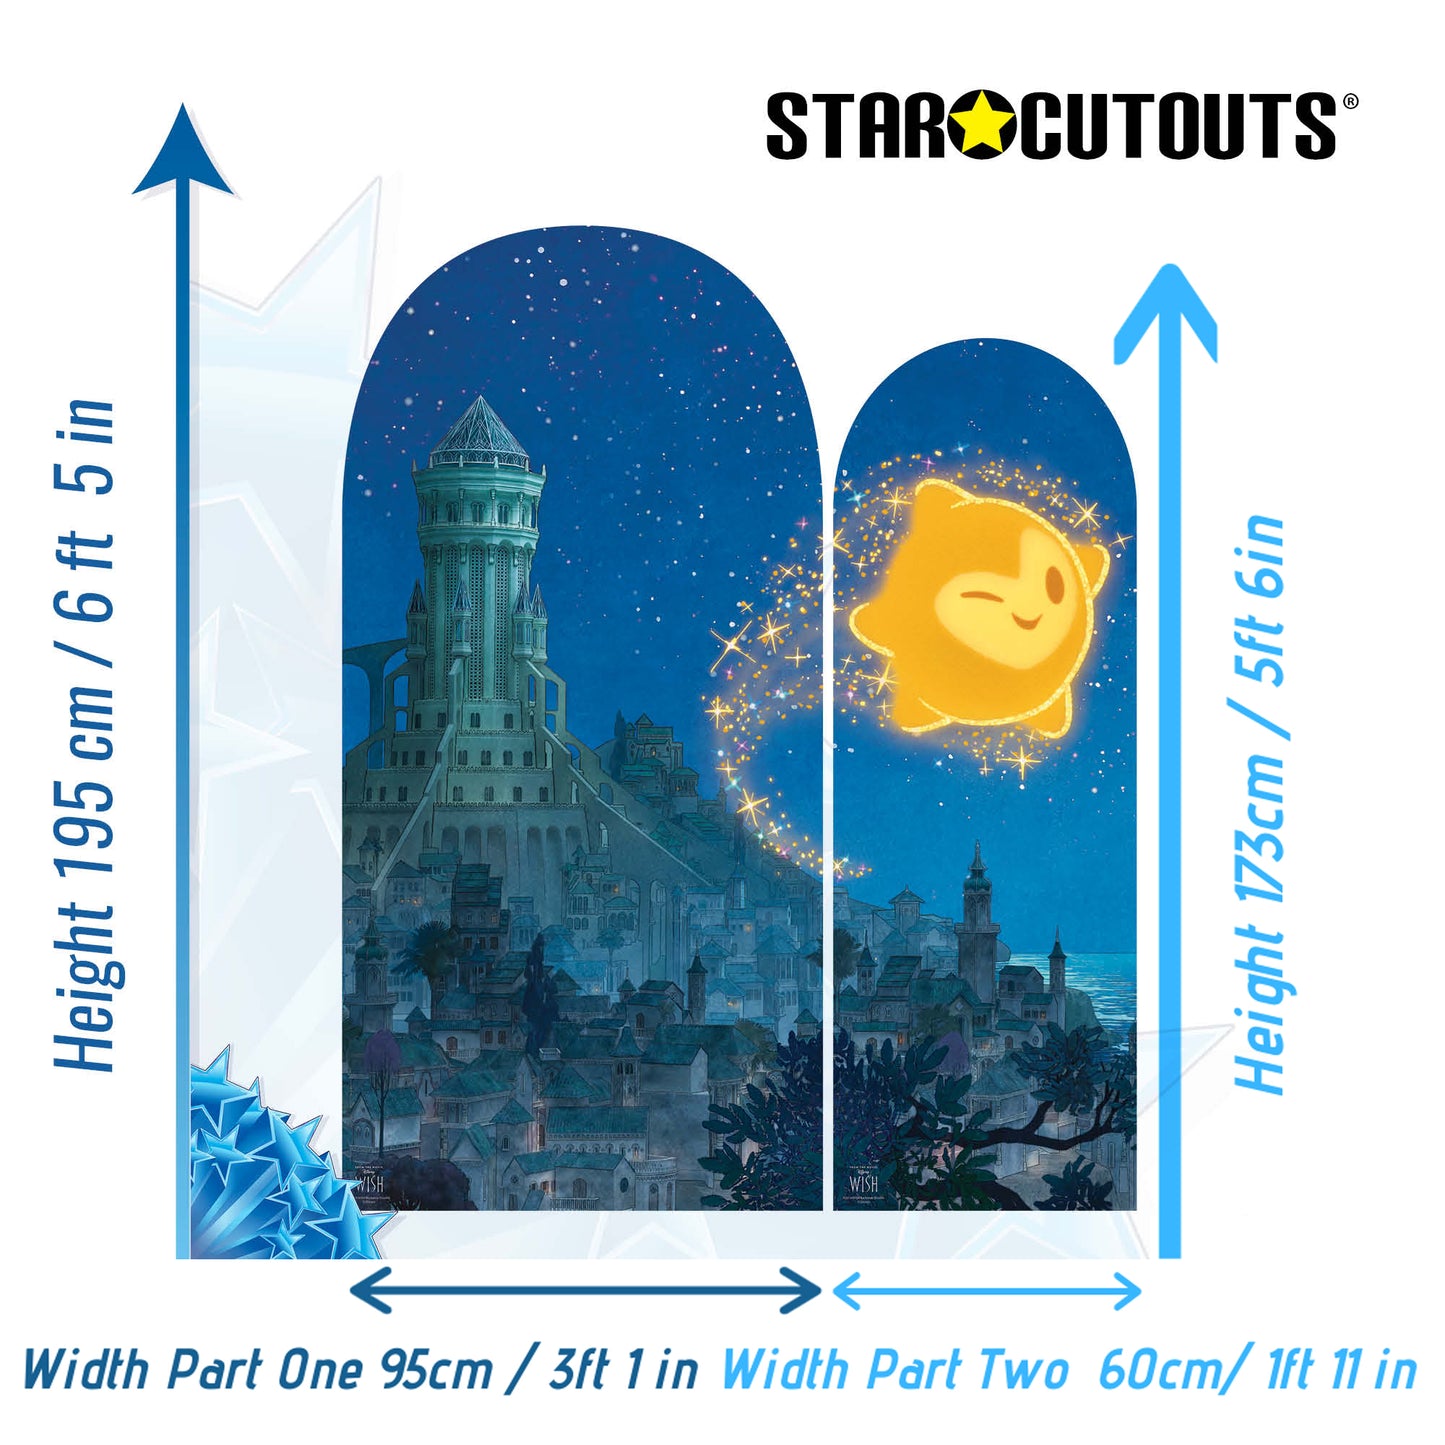 SQ014 WISH Castle and Shooting Star Backdrop Double Height 195cm and 173cm